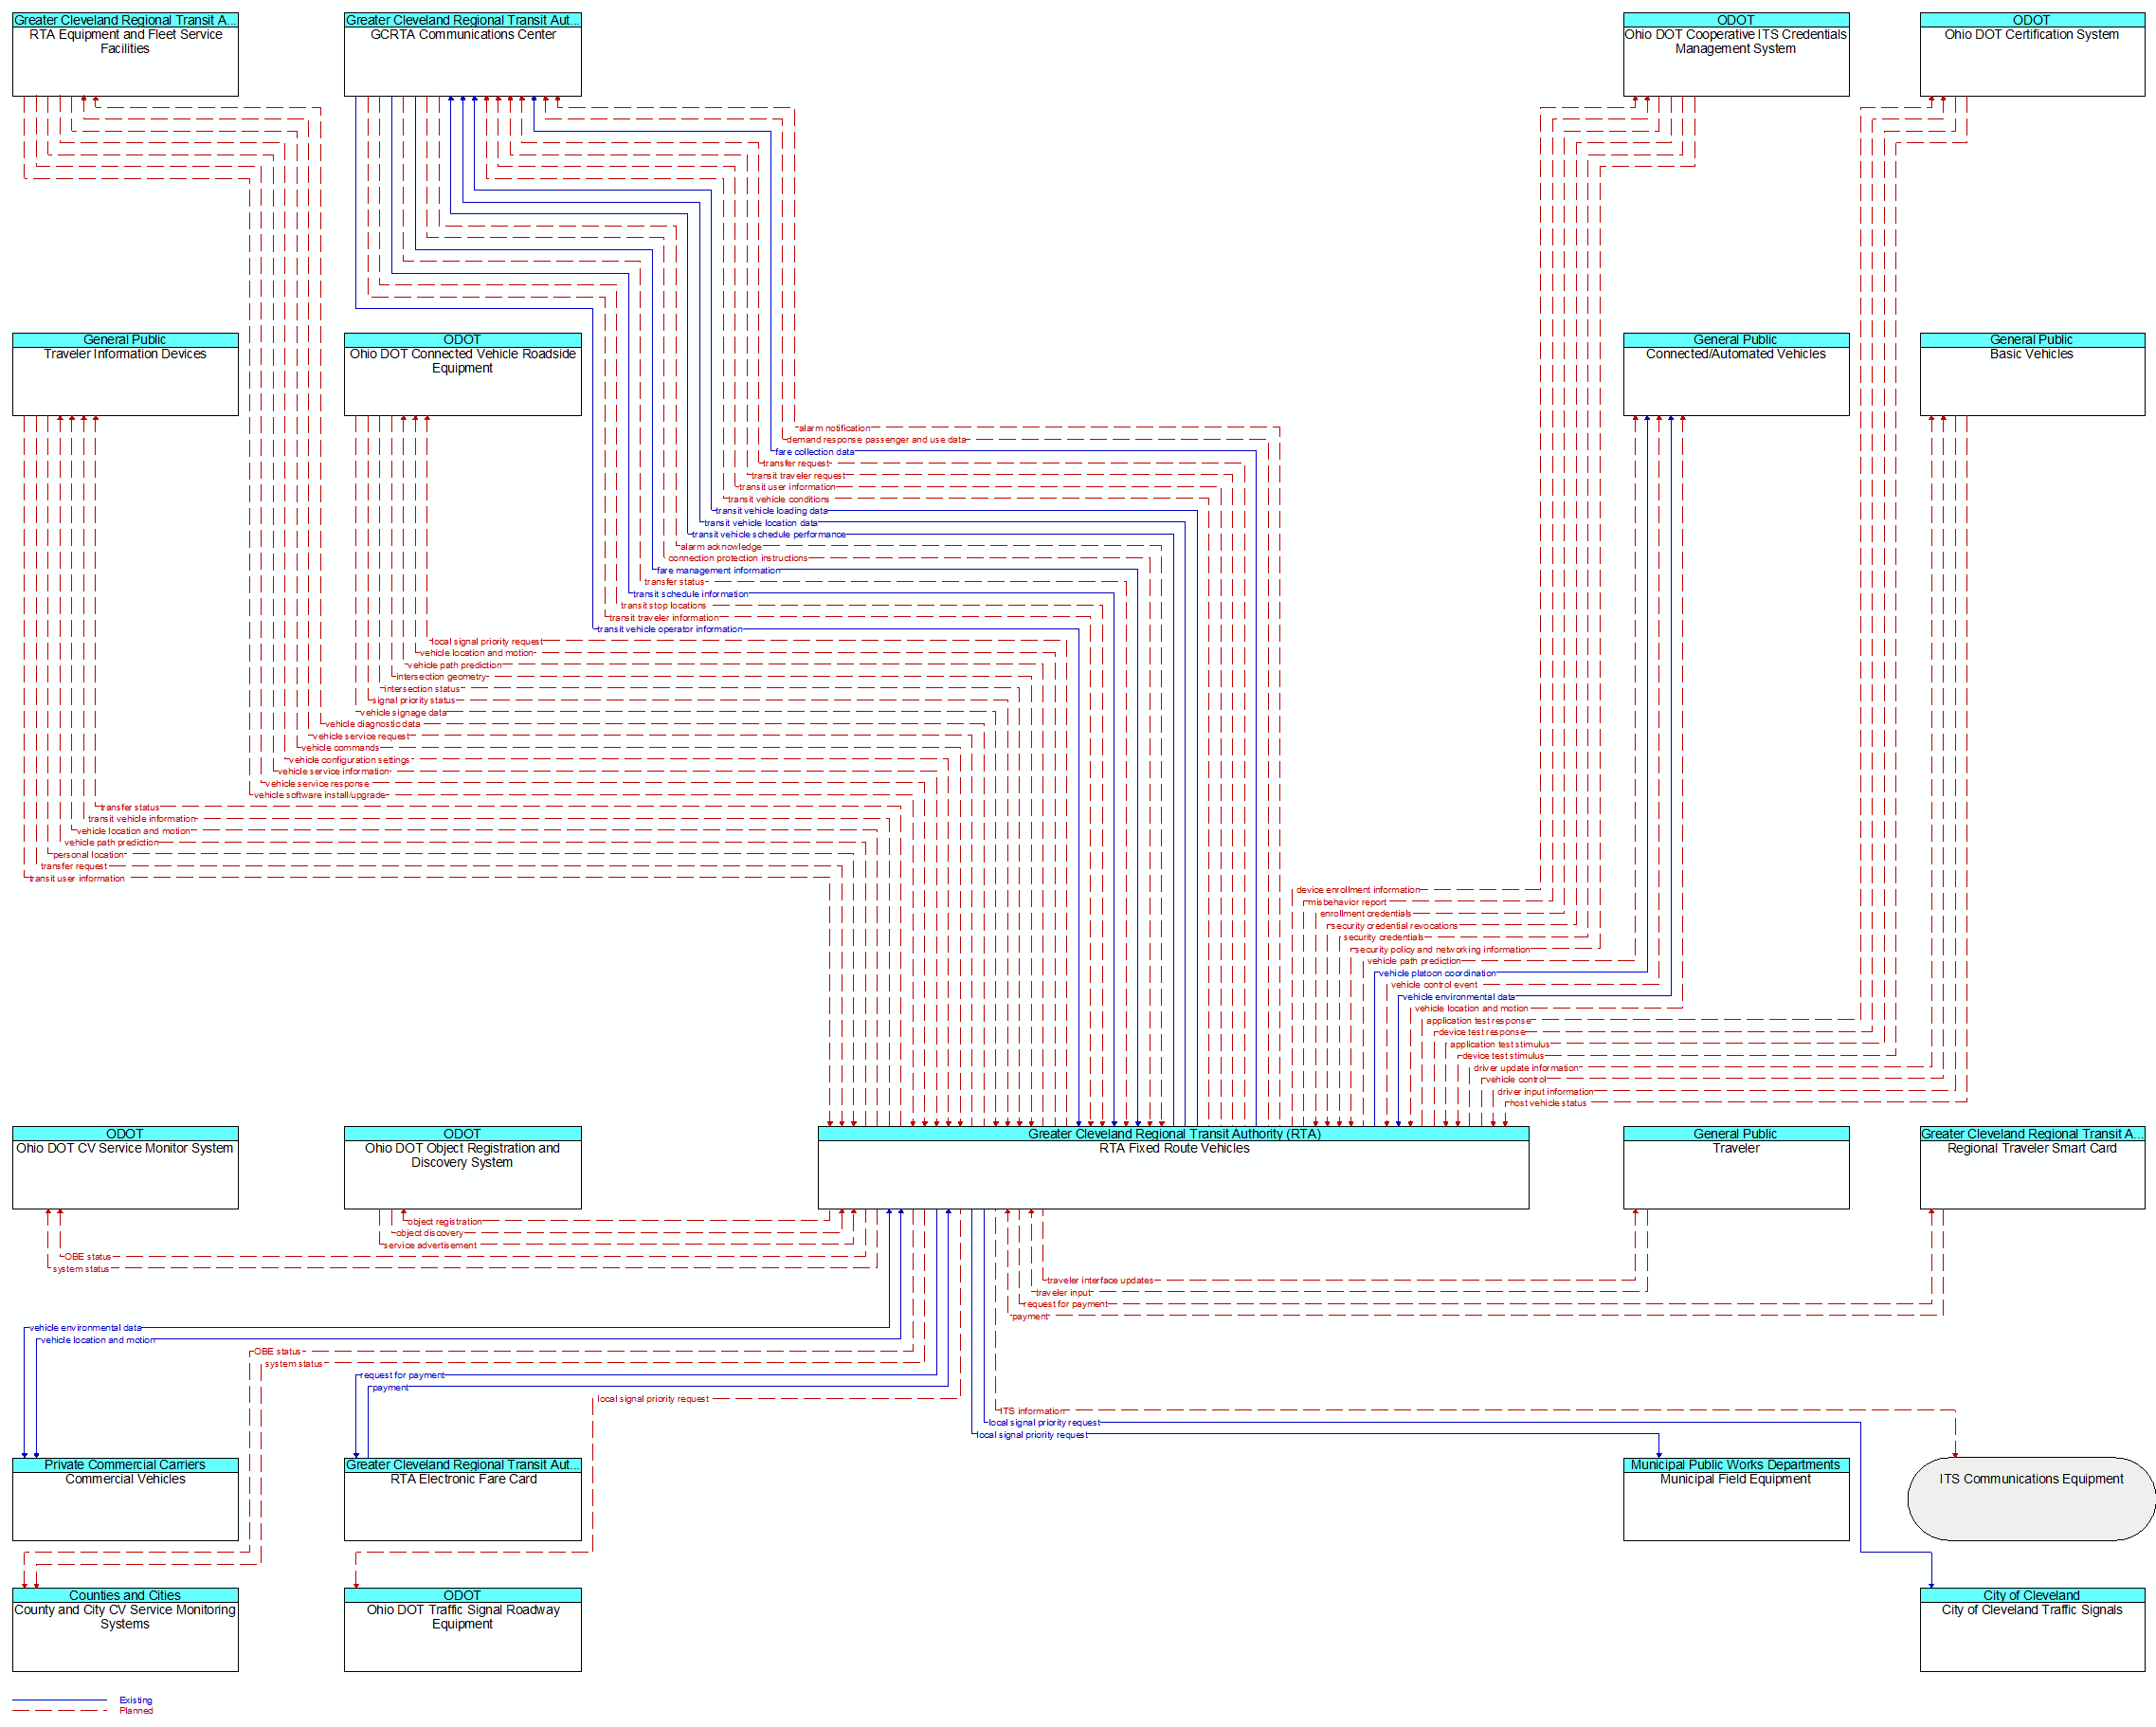 Context Diagram - RTA Fixed Route Vehicles